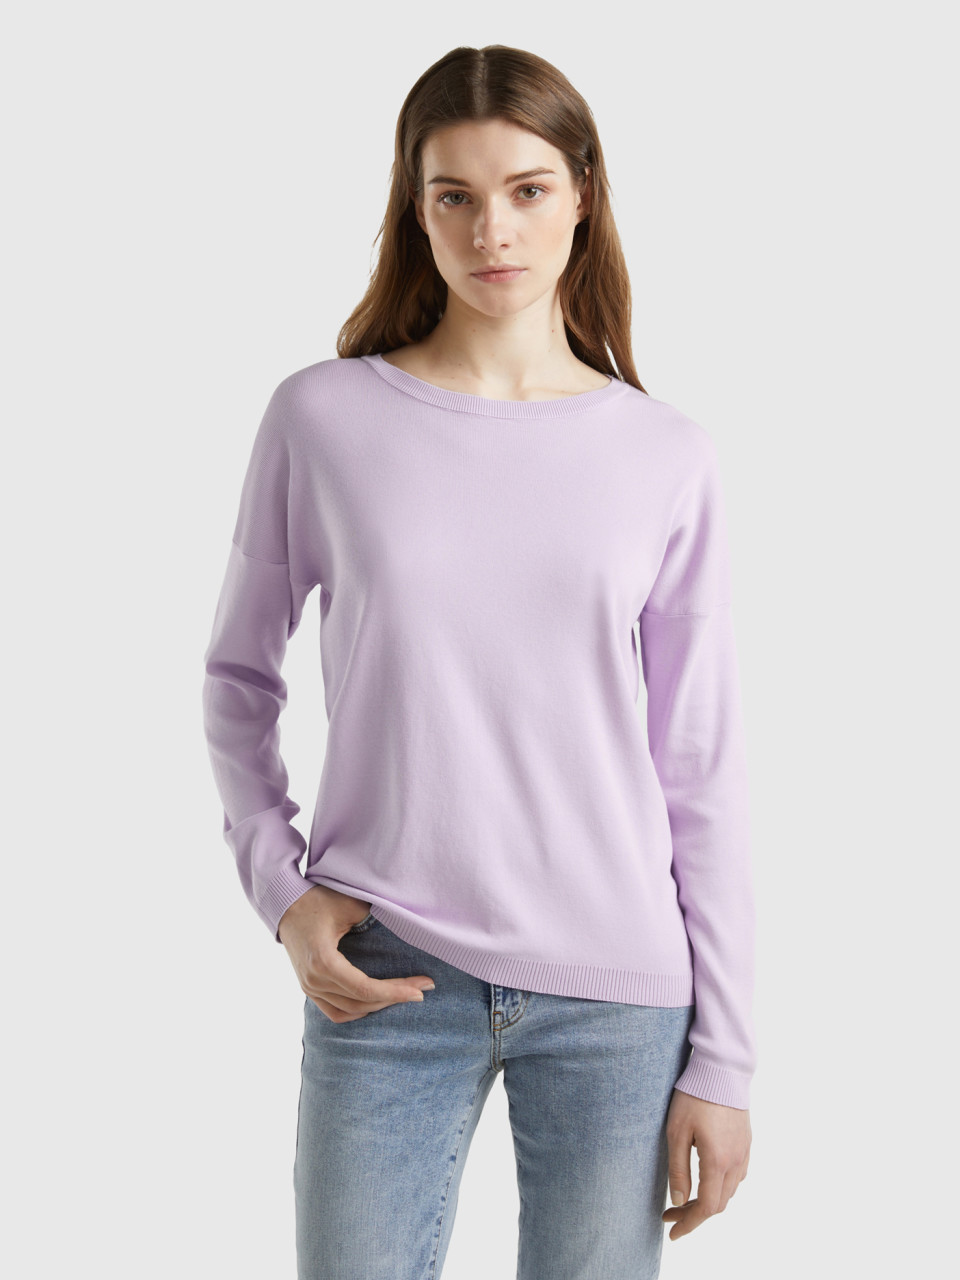 Benetton, Cotton Sweater With Round Neck, Lilac, Women